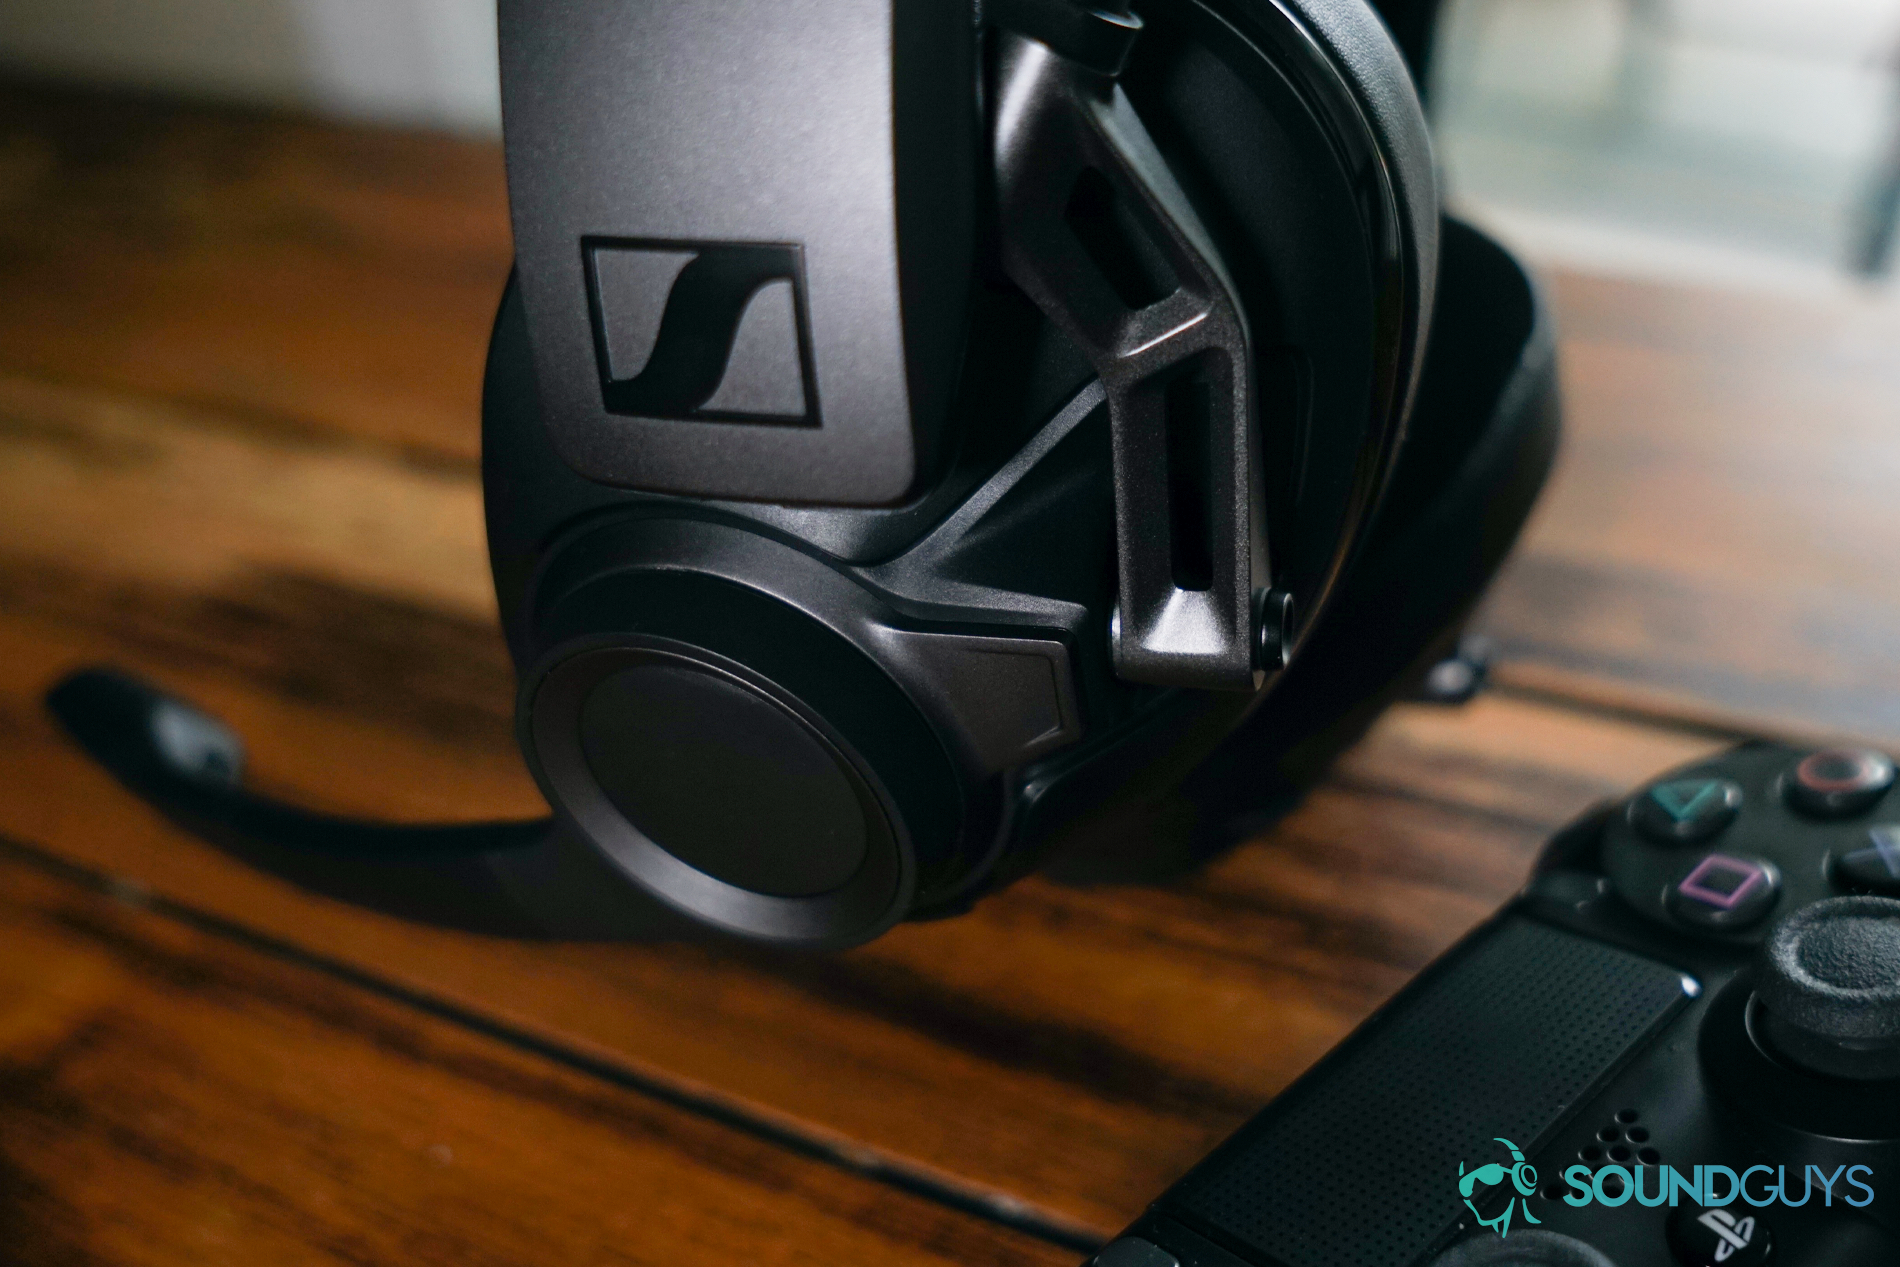 The Sennheiser GSP 670 gaming headset sits on a wooden table next to a Playstation 4 Dualshock controller.